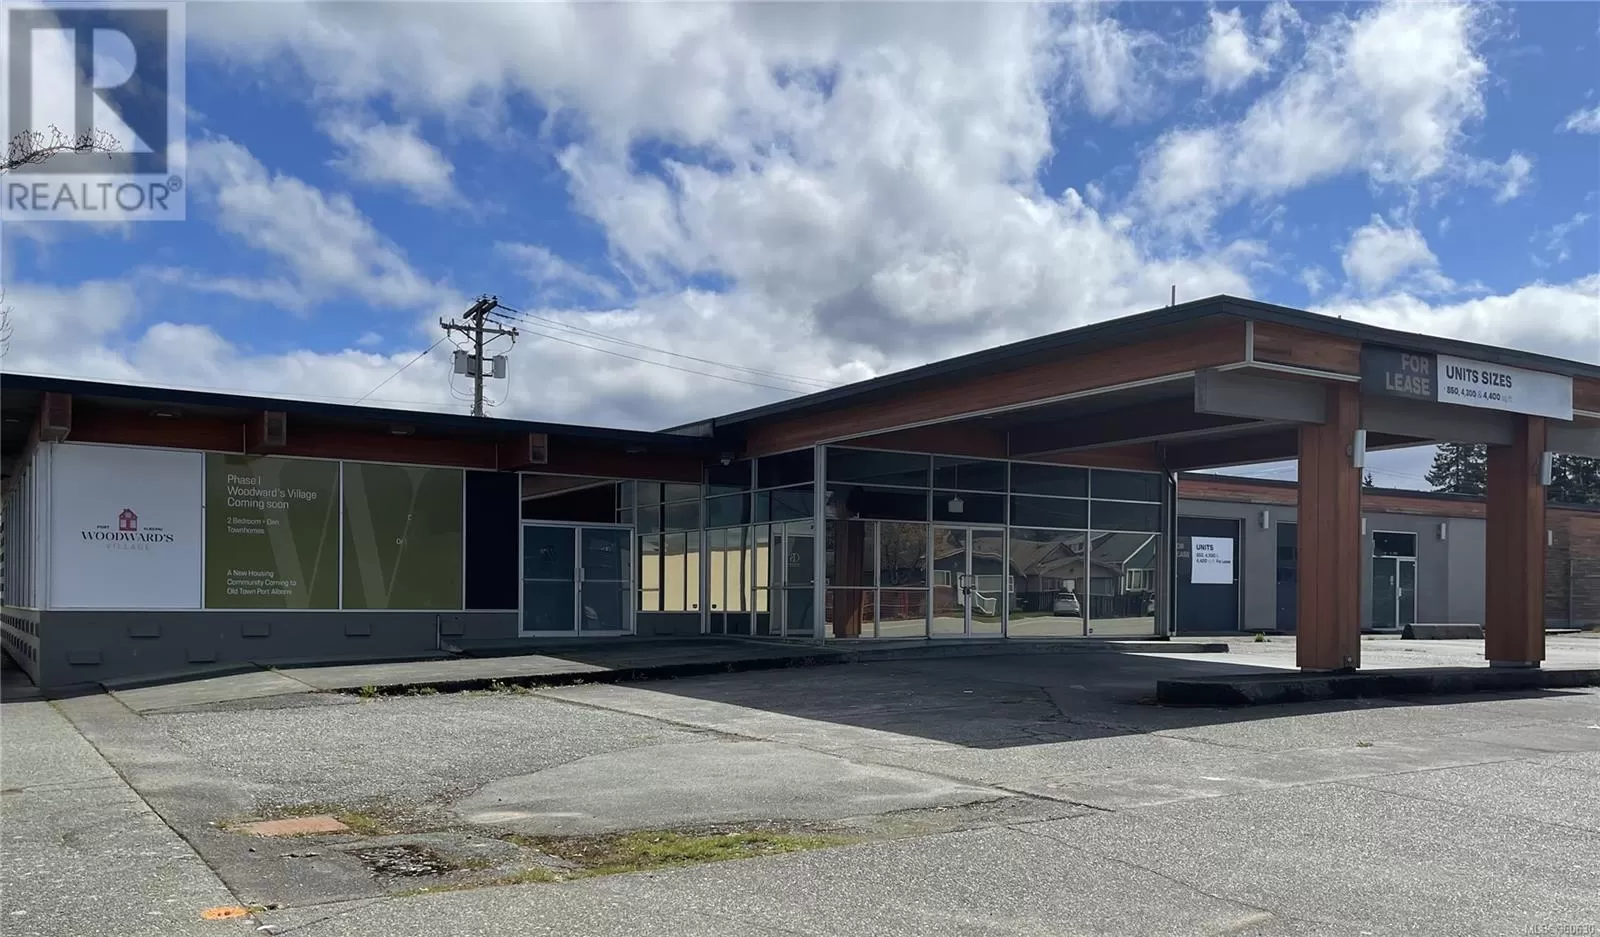 Offices for rent: B 2889 3rd Ave, Port Alberni, British Columbia V9Y 2A9